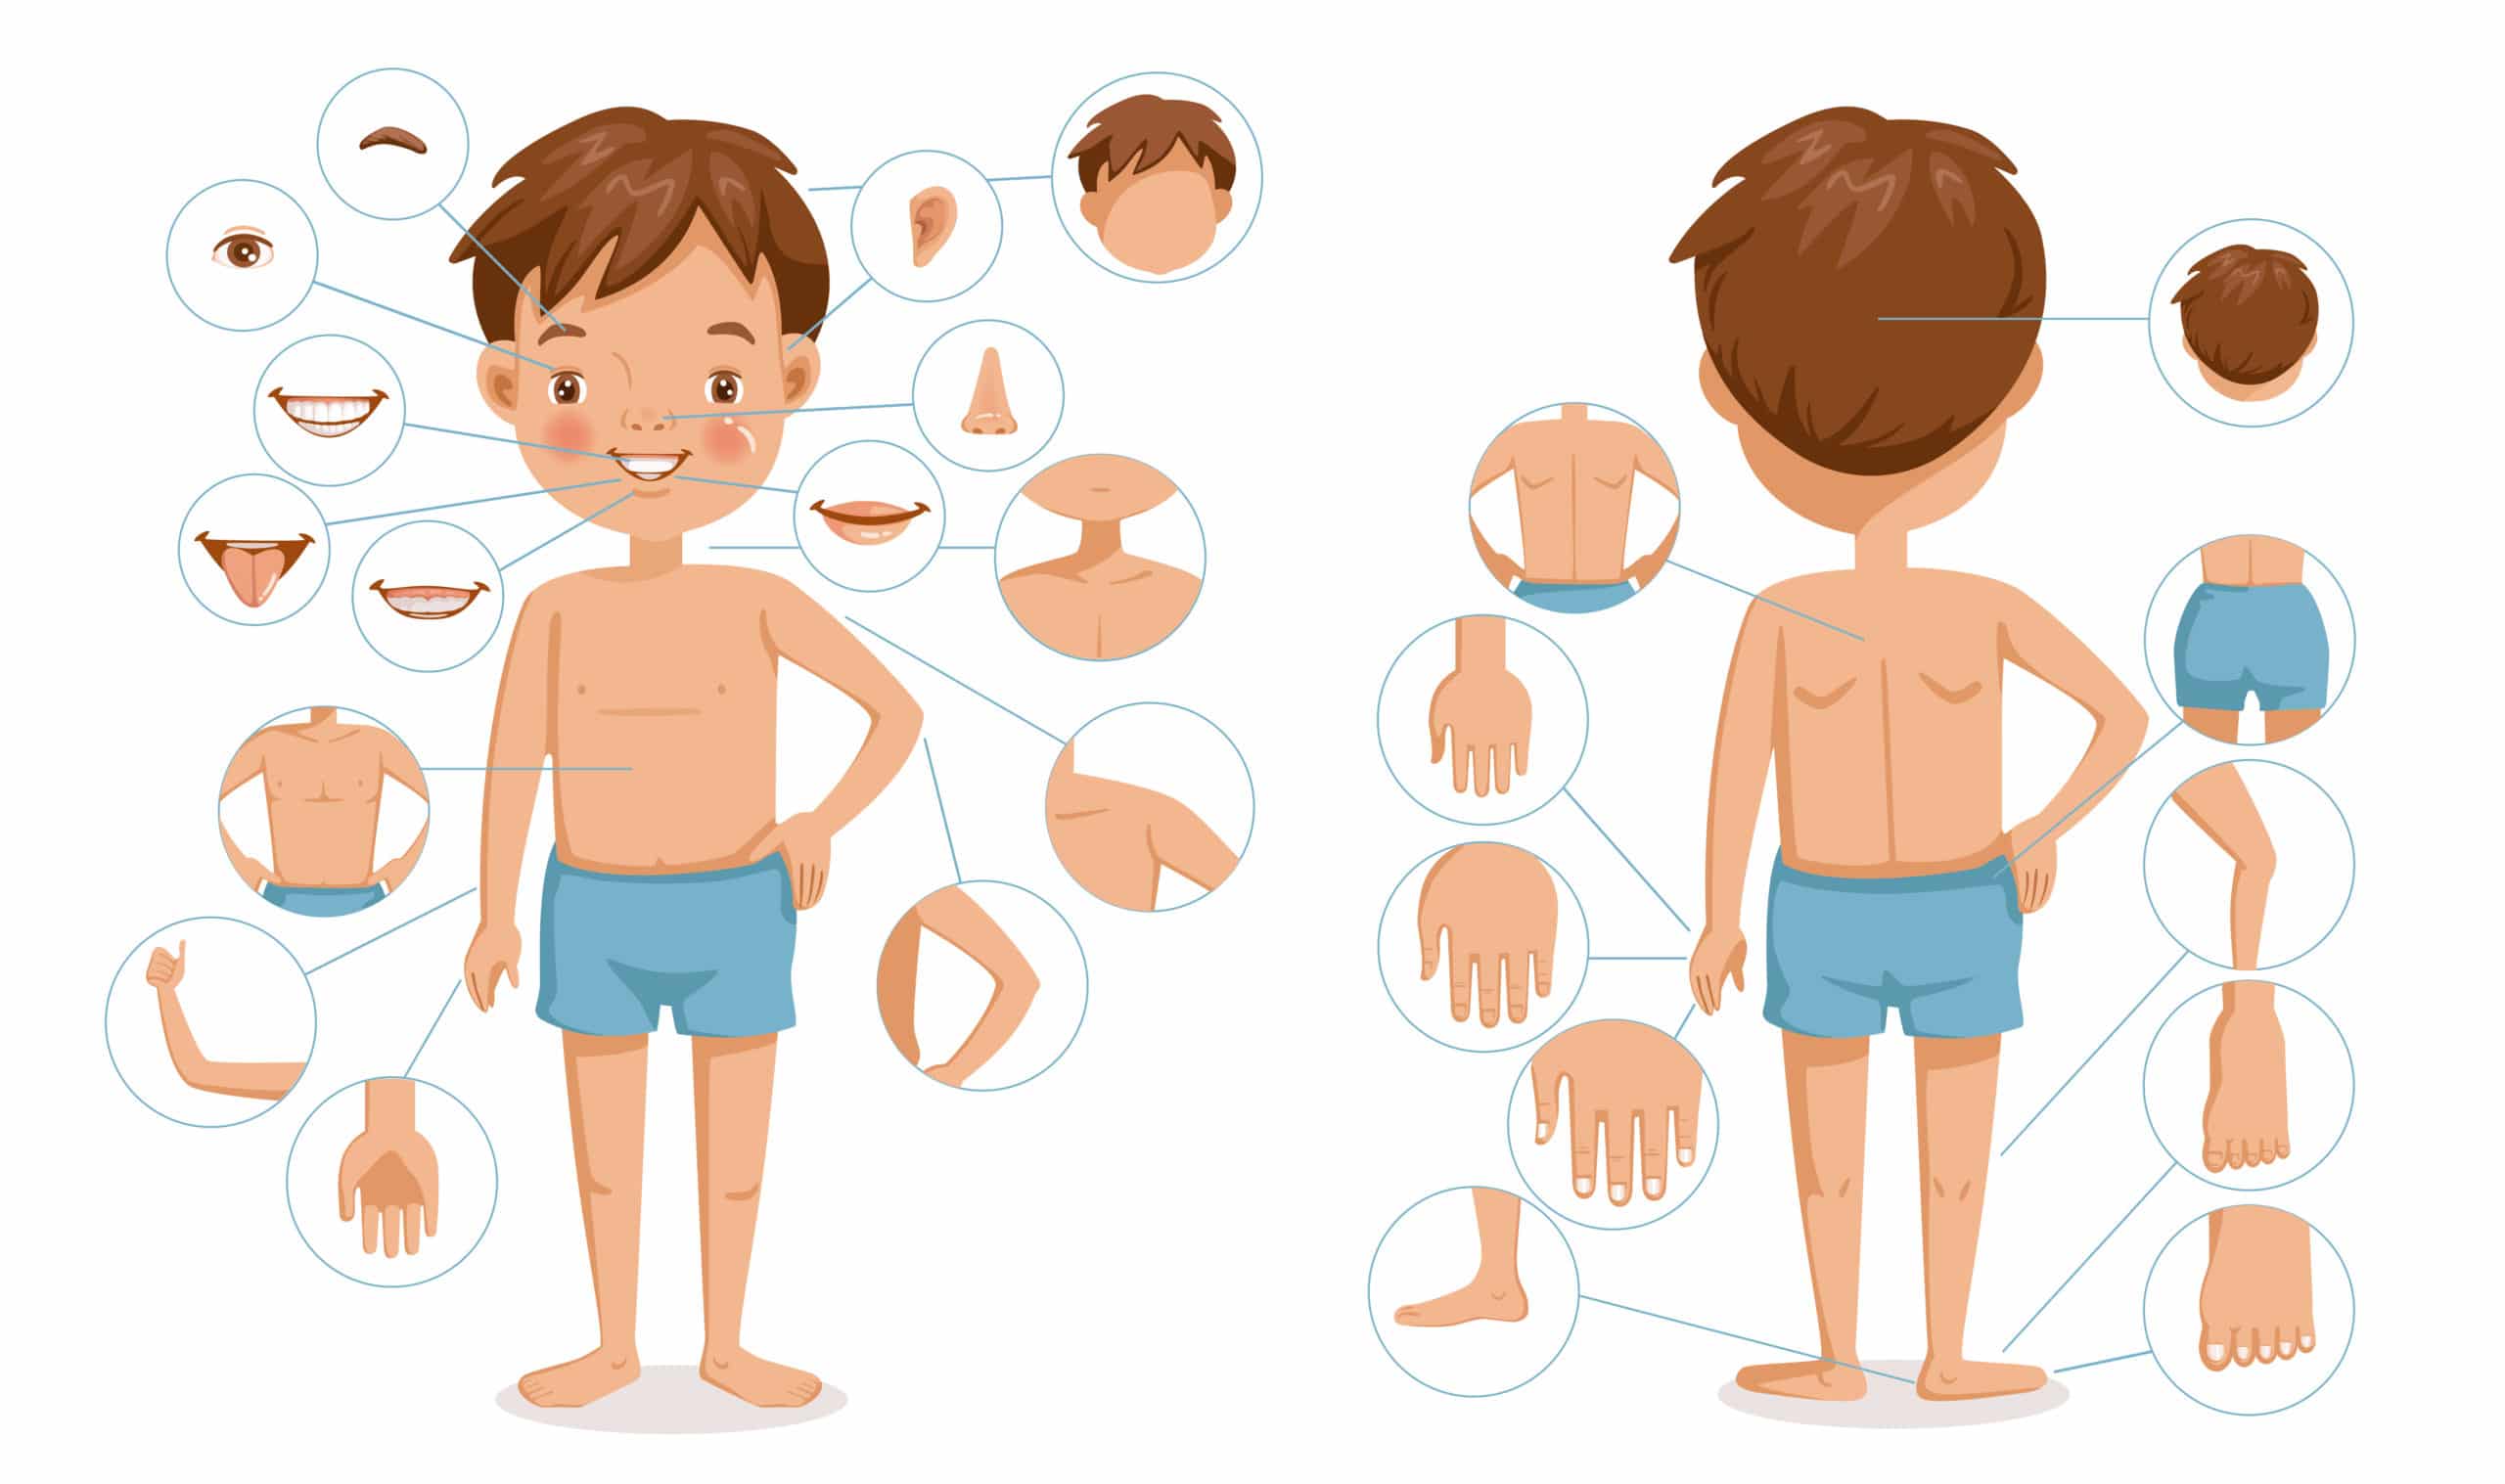 learning-names-for-body-parts-in-spanish-trufluency-kids